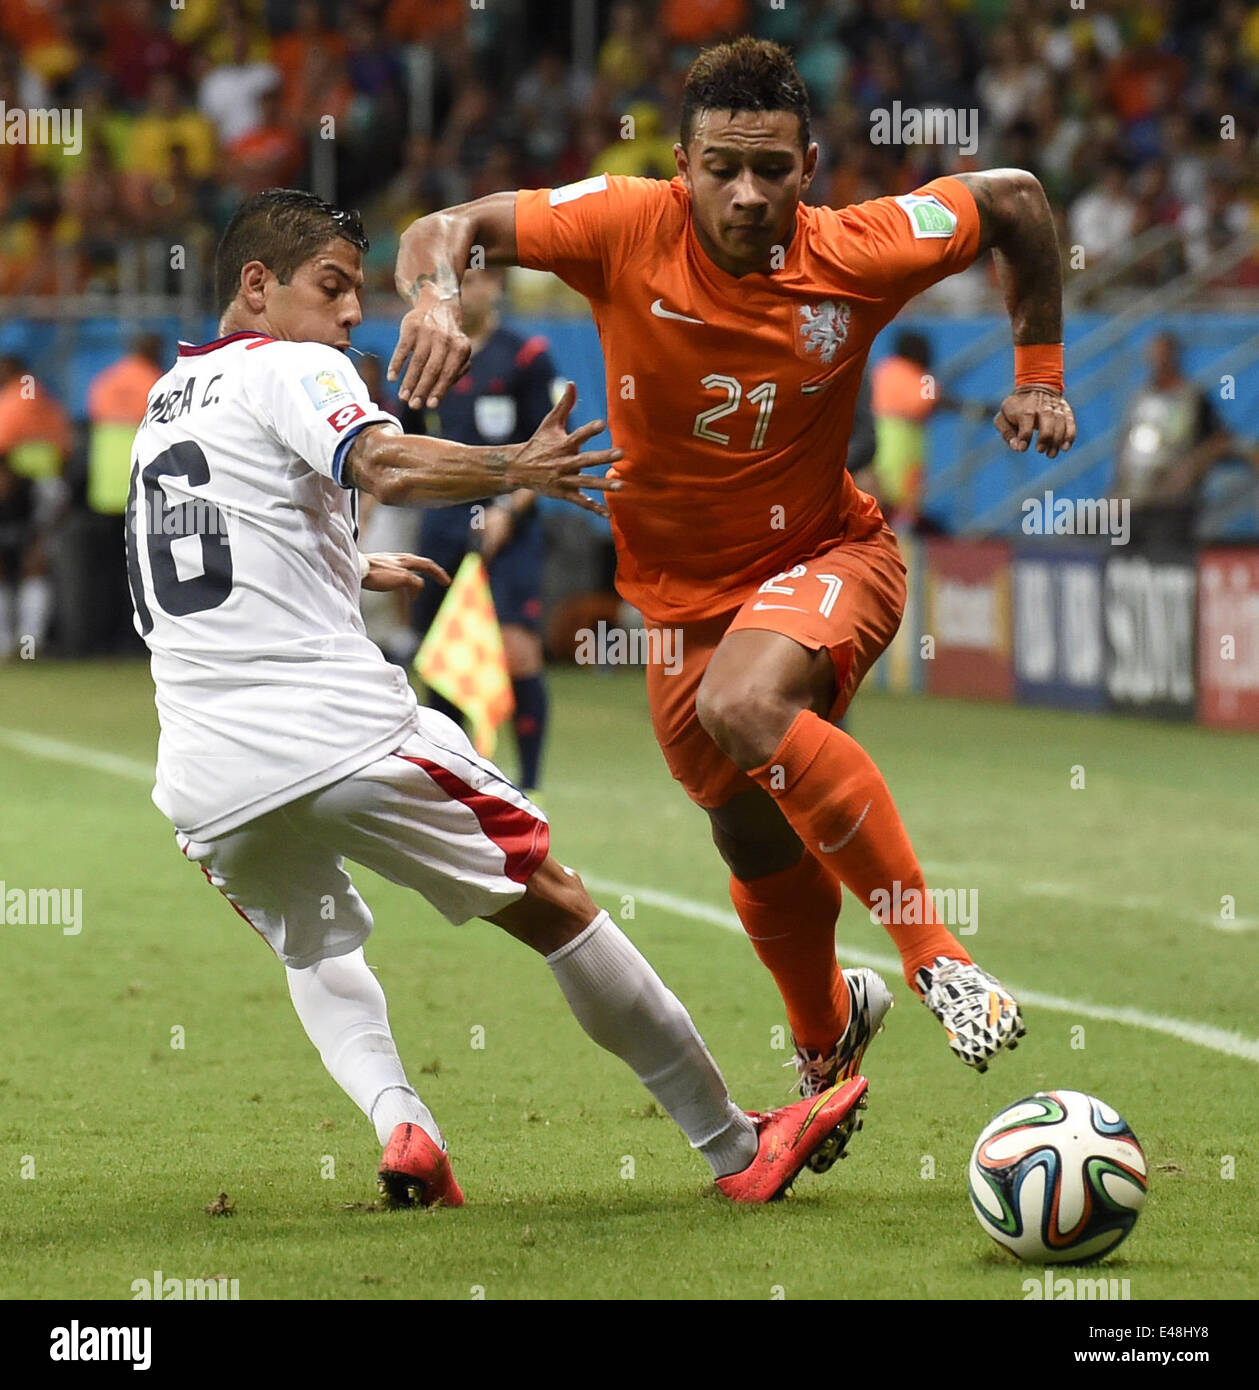 Salvador, Brazil. 5th July, 2014. Netherlands's Memphis Depay vies with Costa Rica's Christian Gamboa during a quarter-finals match between Netherlands and Costa Rica of 2014 FIFA World Cup at the Arena Fonte Nova Stadium in Salvador, Brazil, on July 5, 2014. Credit:  Lui Siu Wai/Xinhua/Alamy Live News Stock Photo